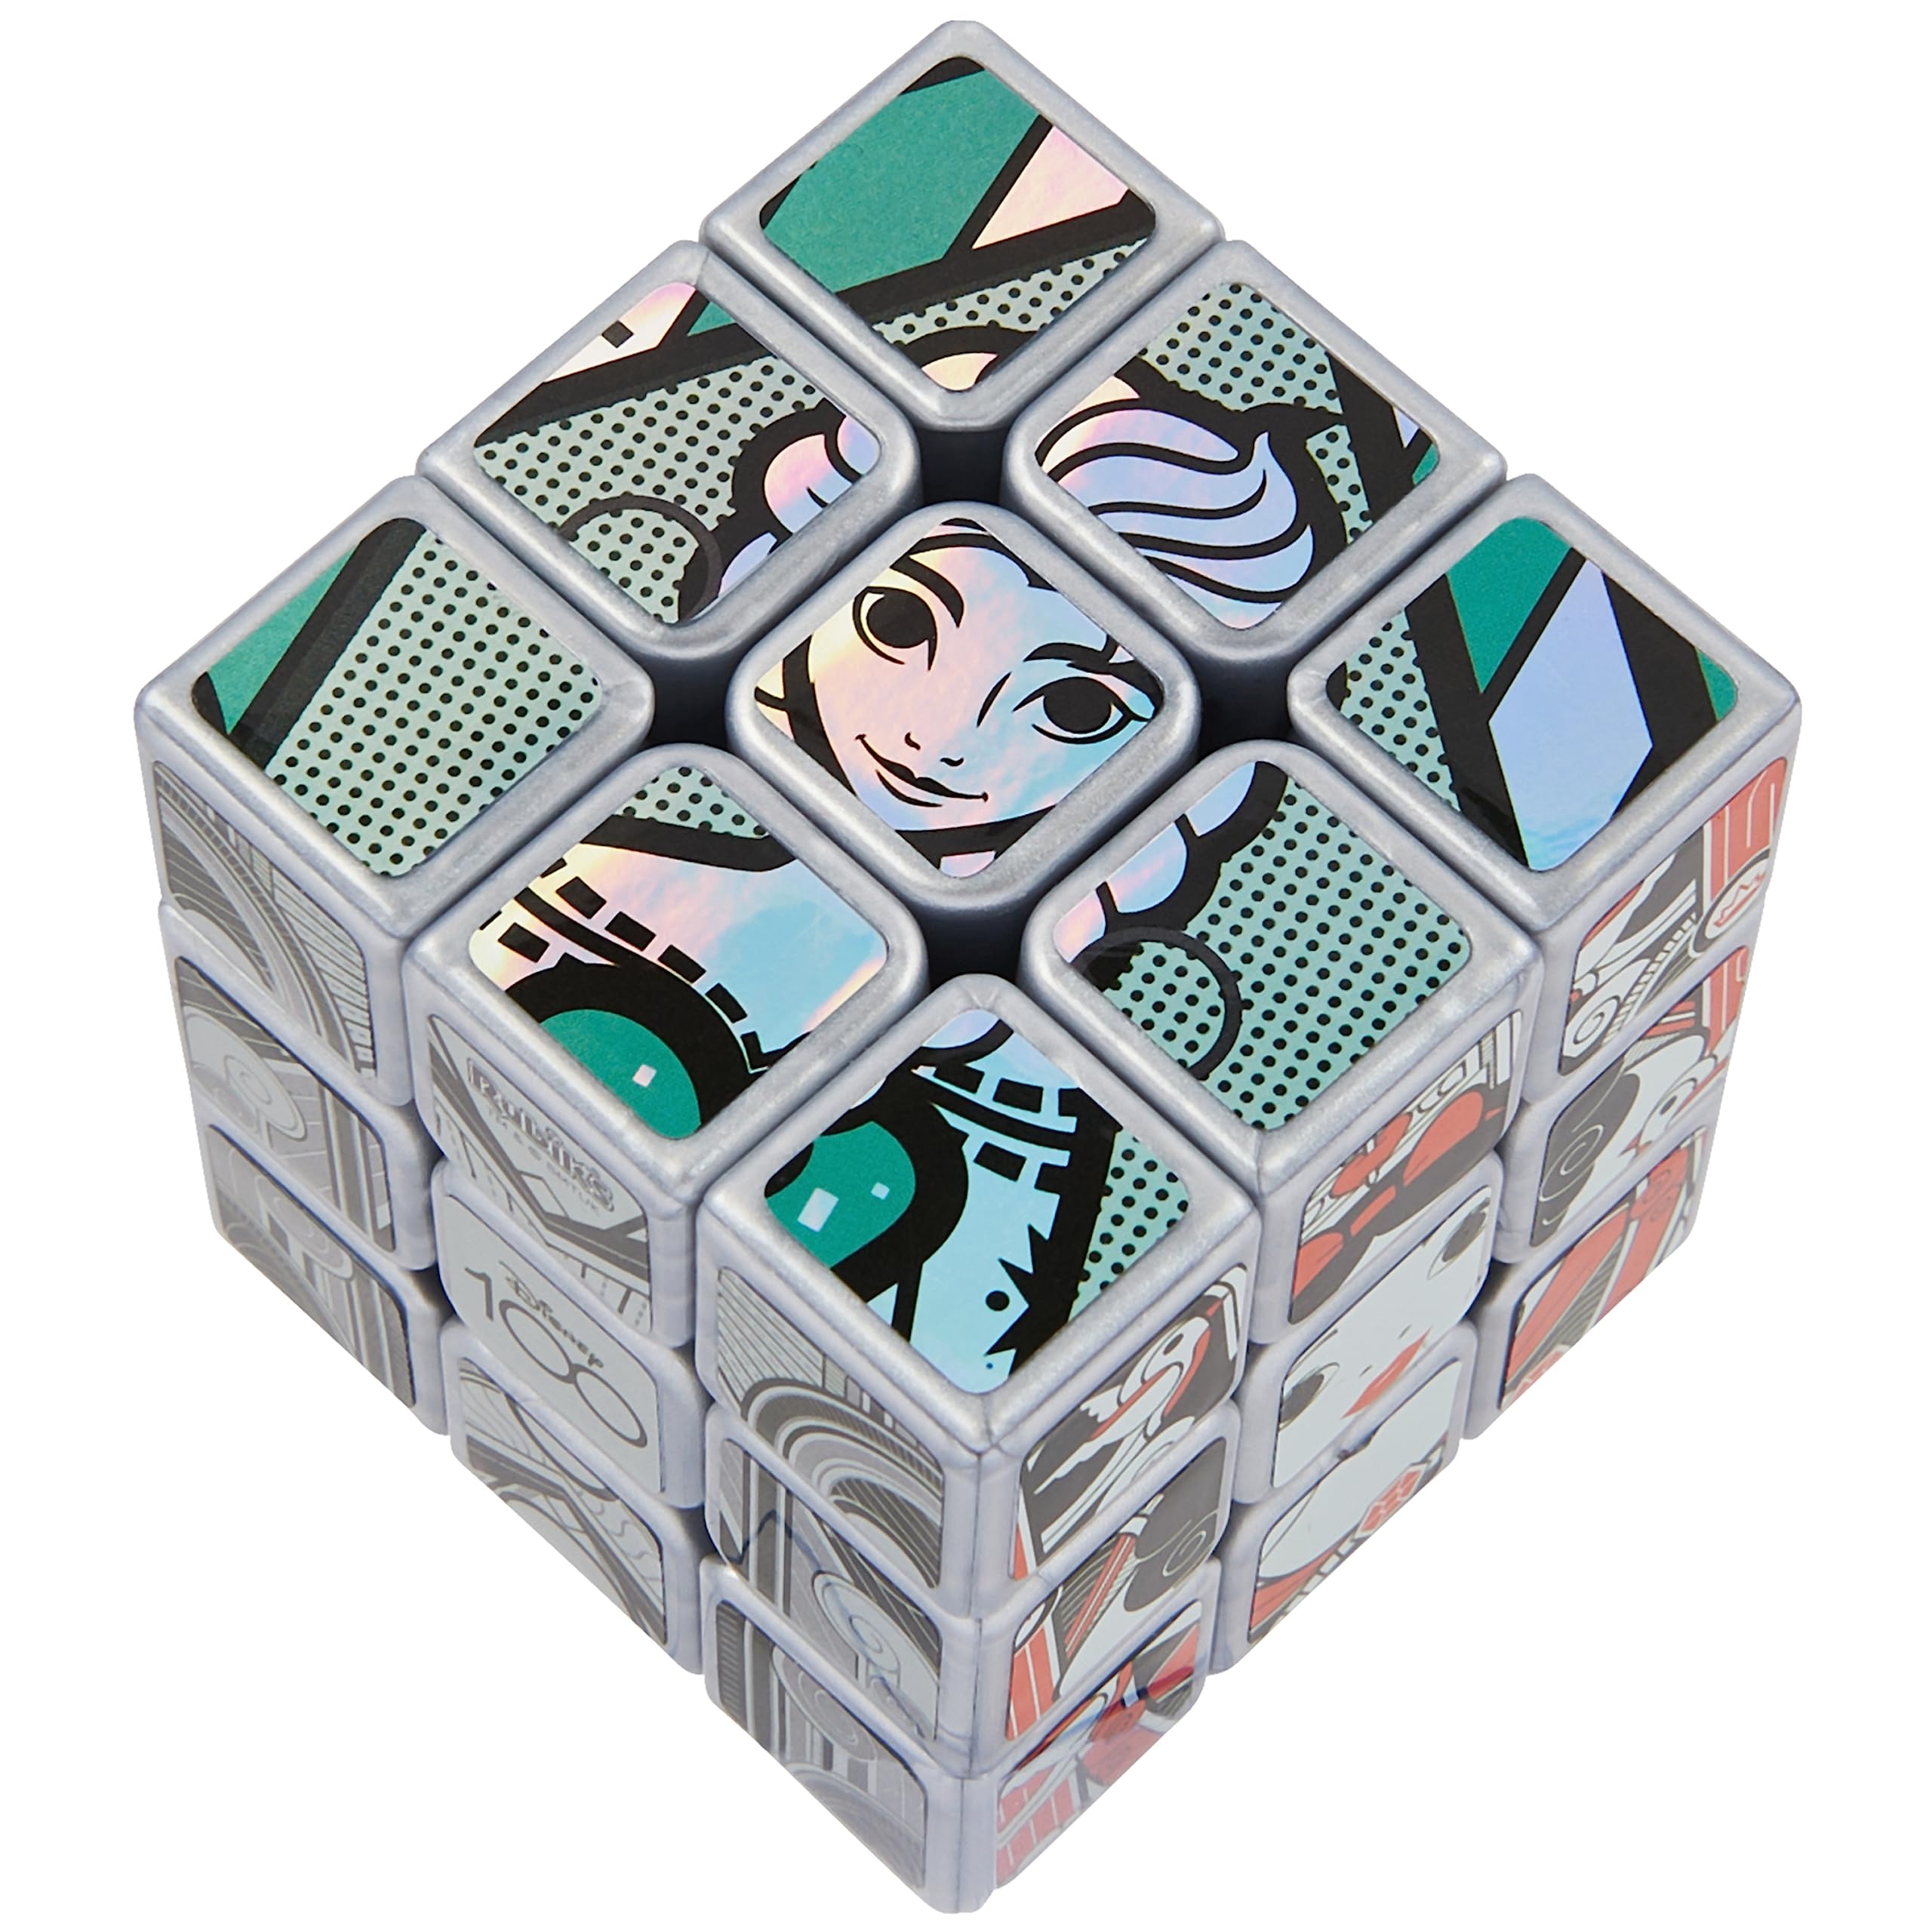 Rubik's Cube, Disney 100th Anniversary Metallic Platinum 3x3 Cube | Fidget Toys Adults| Mickey Mouse Toys | Disney Toys for Adults & Kids Ages 8+